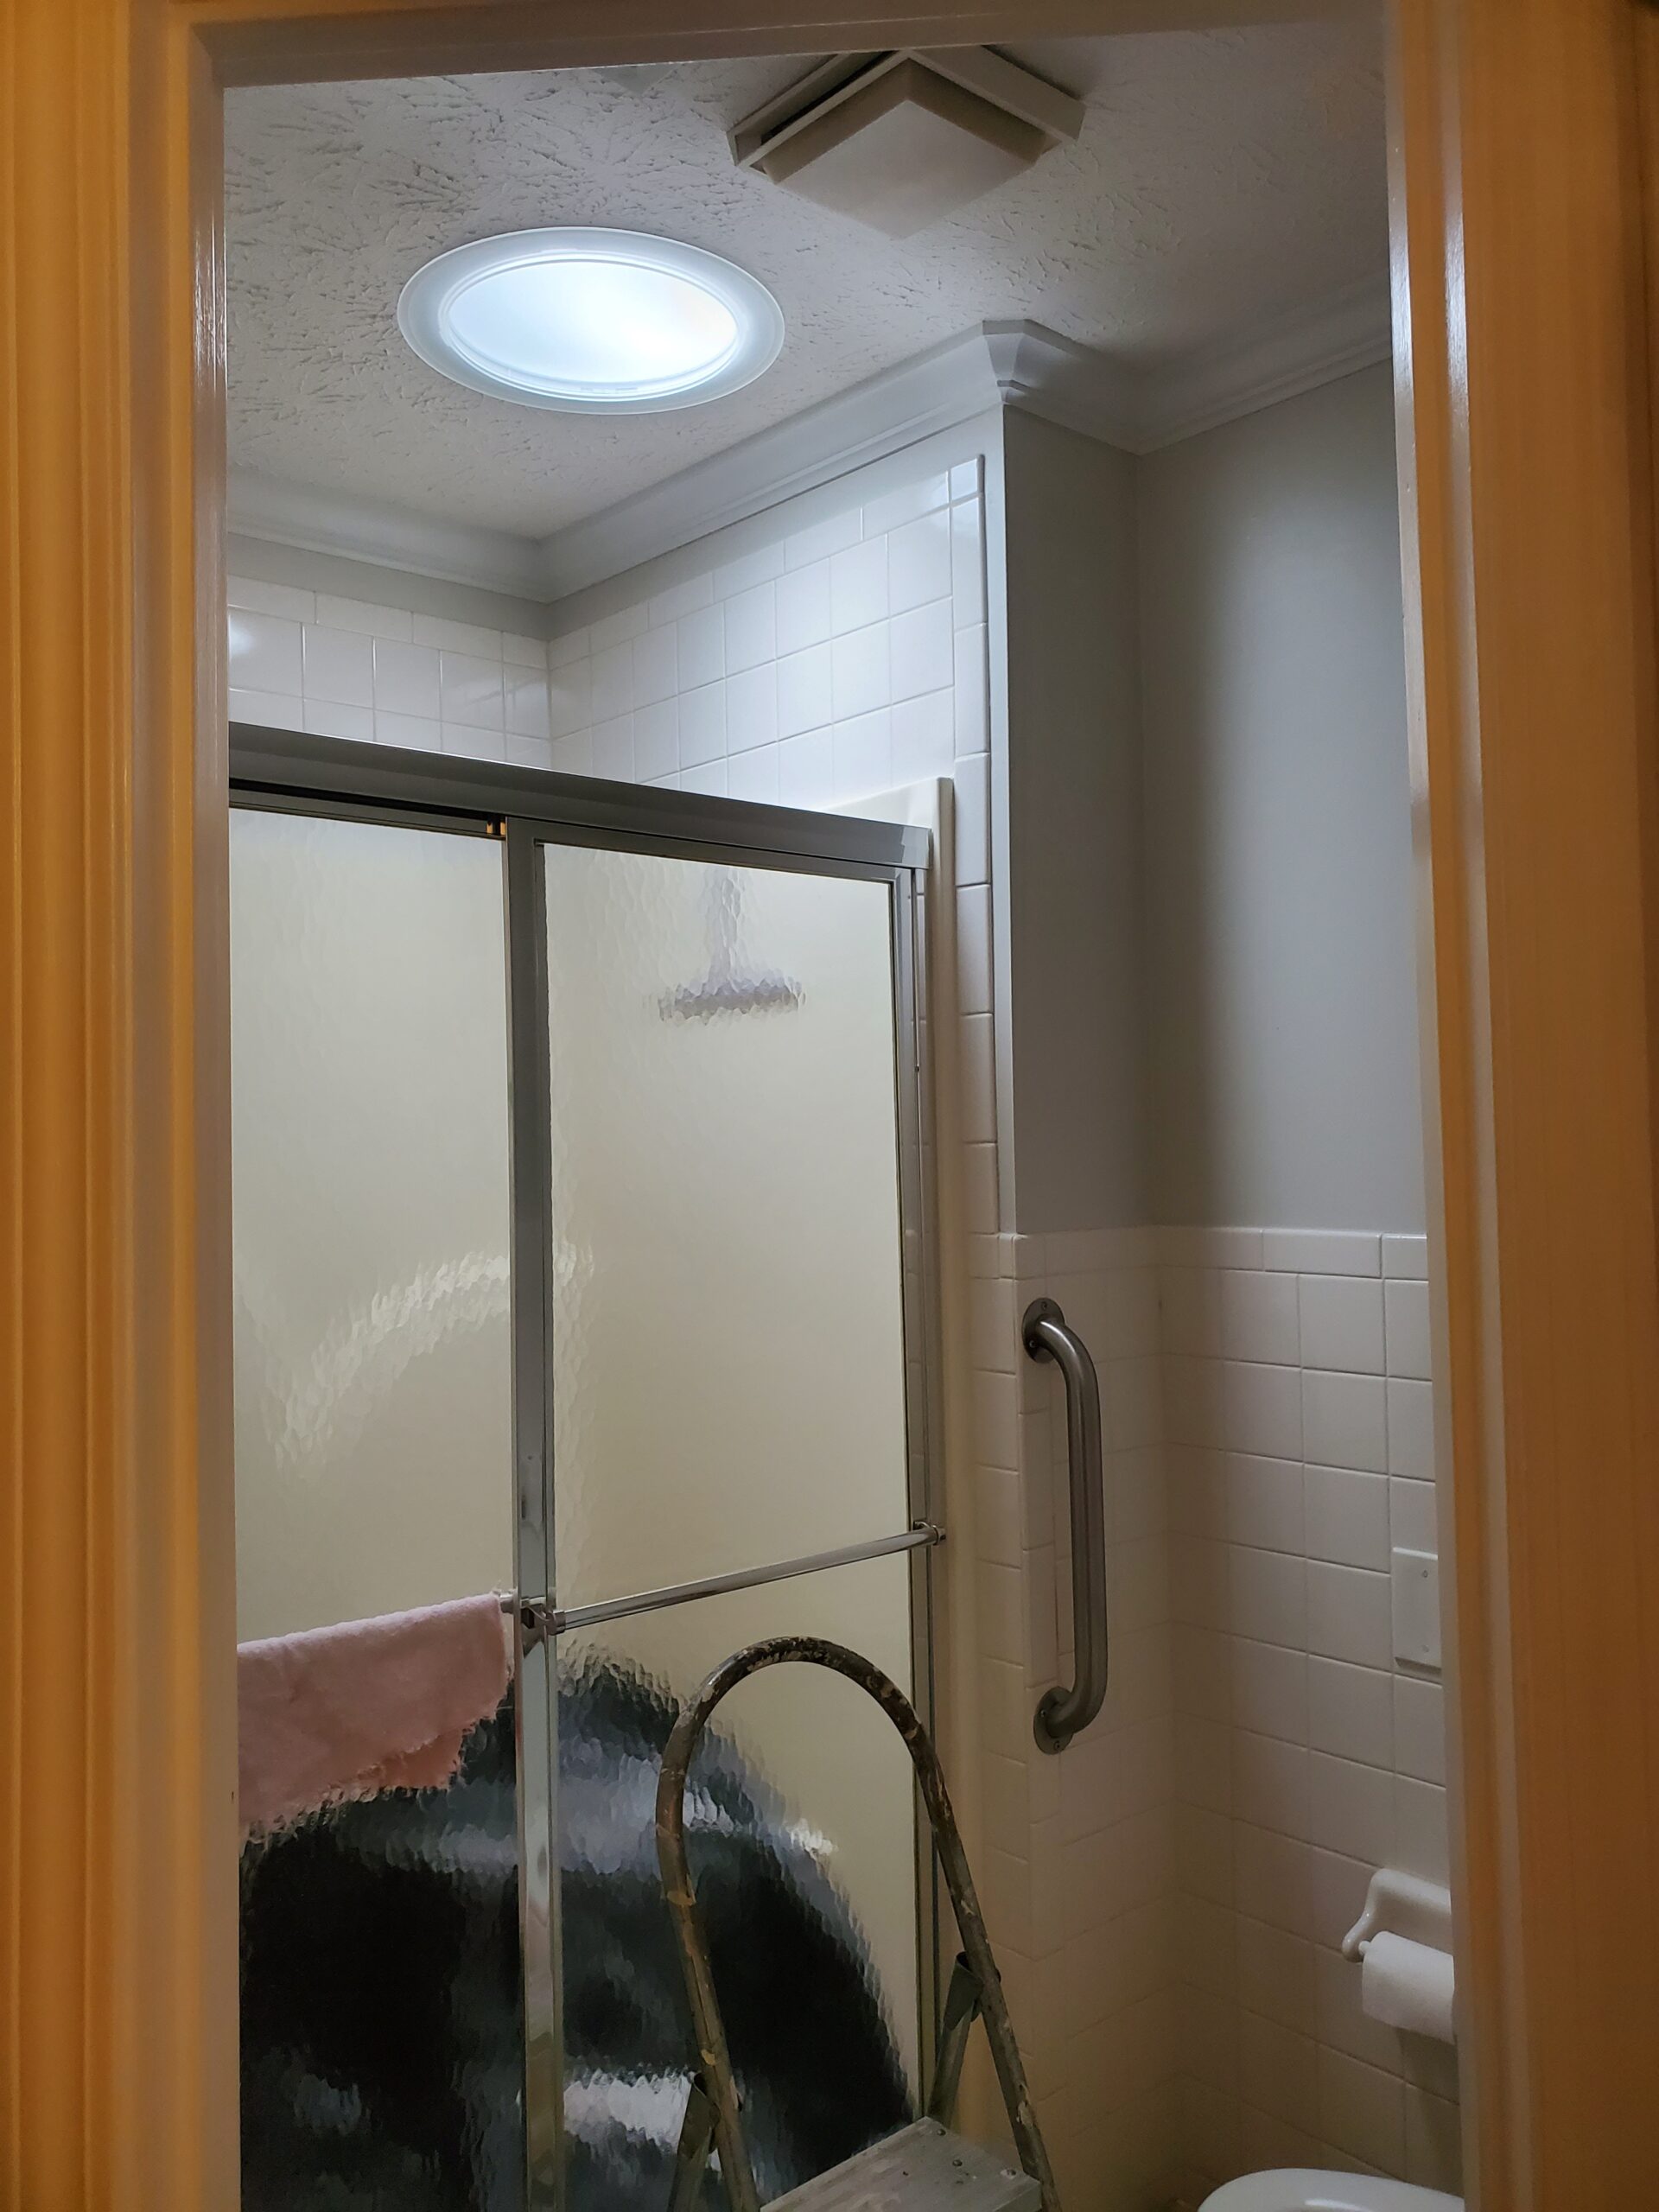 velux sun tunnel is letting light into this bathroom